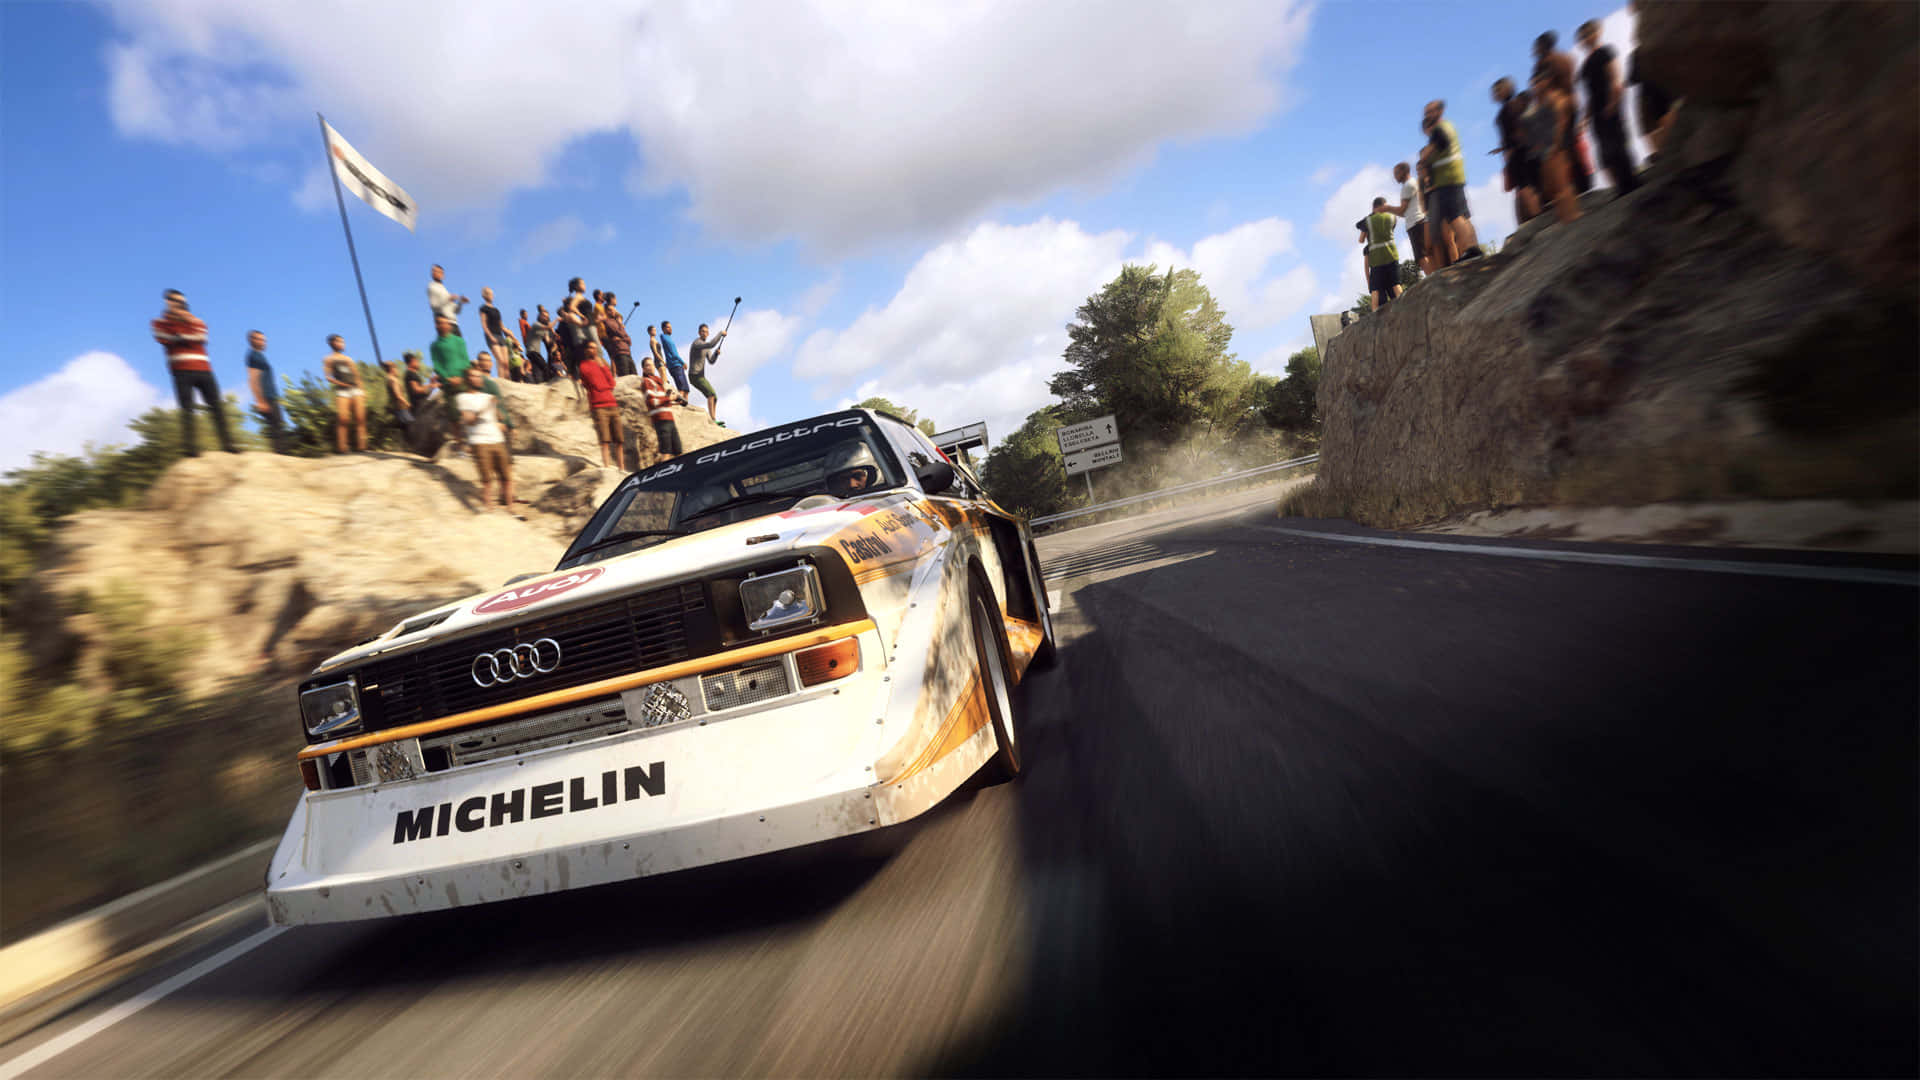 Take the wheel and prepare to go rallying in stunning 1920x1080 Dirt Rally!